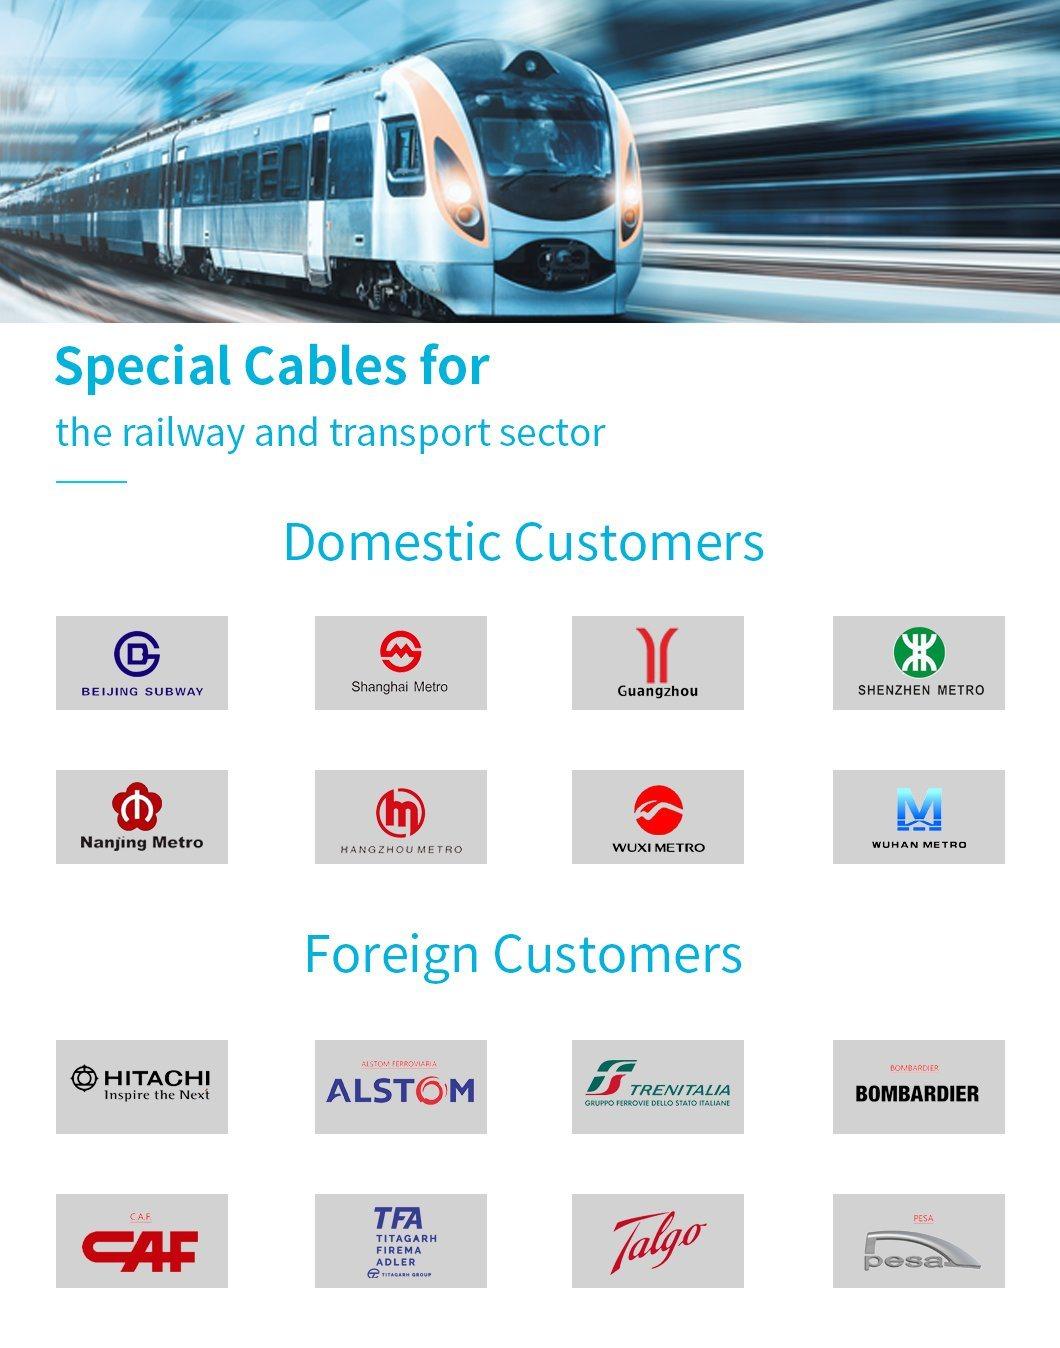 Highly Skilled Technicians Communication Cable with CE Certification for High-Speed Rail